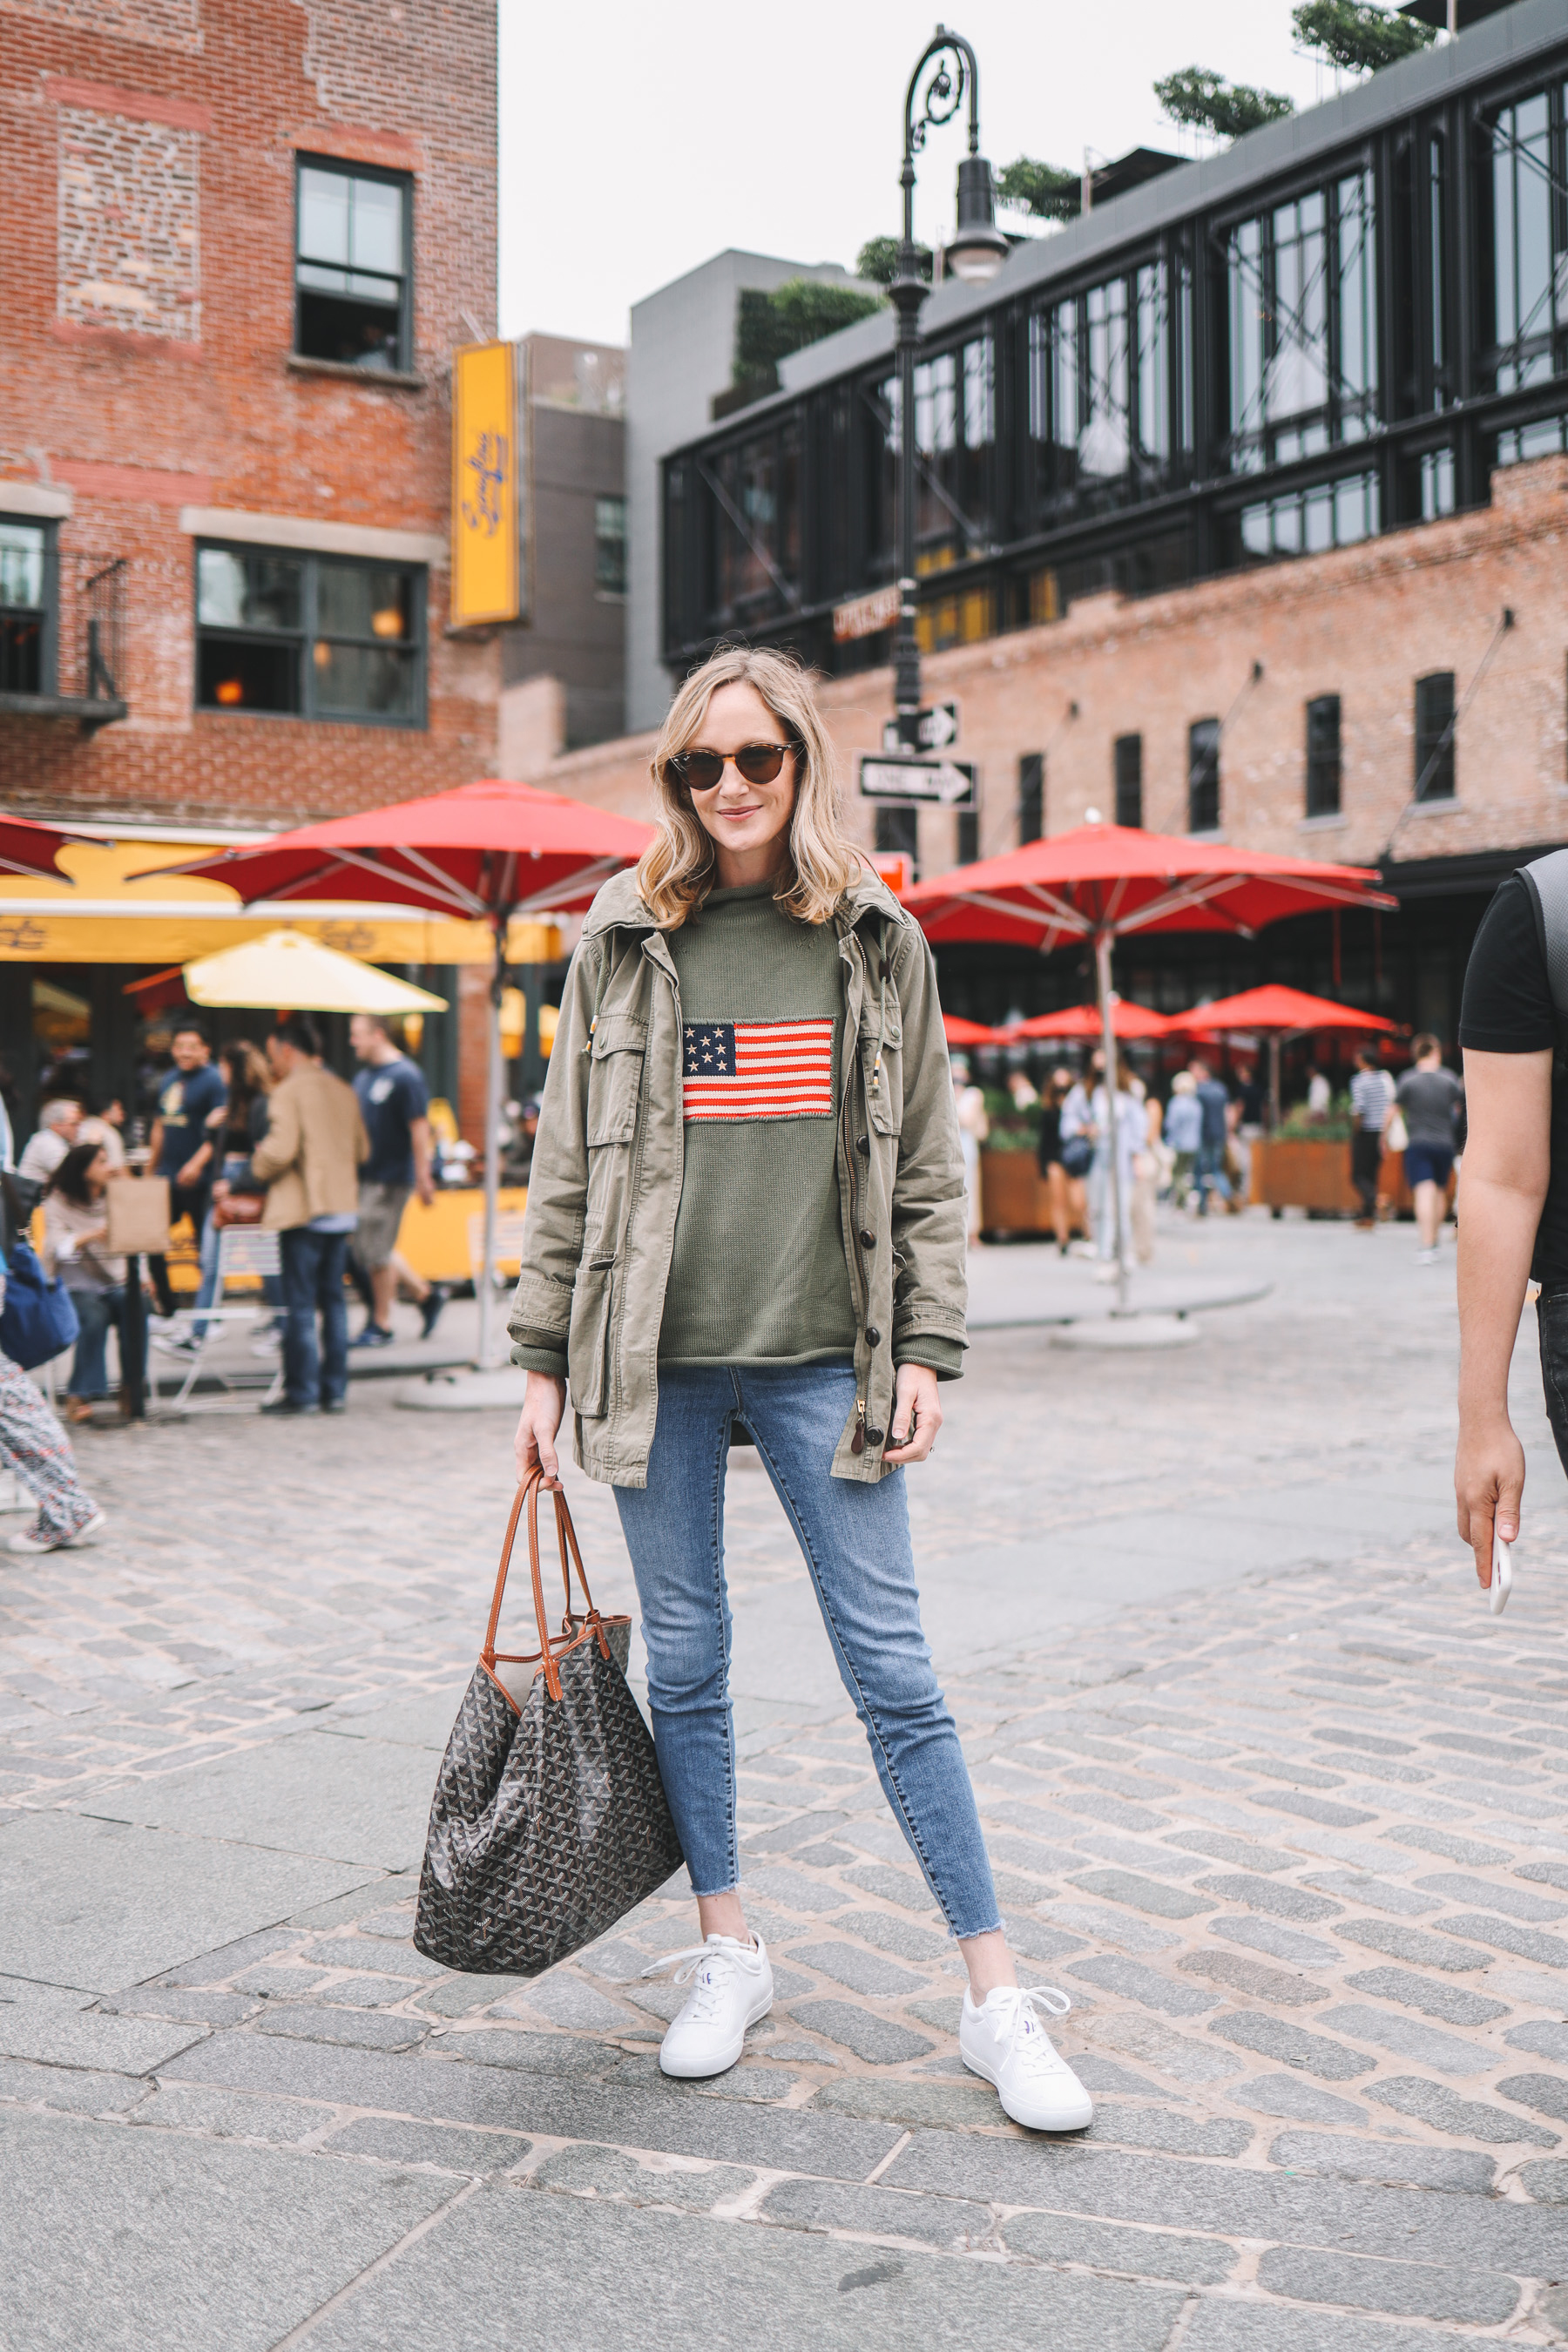 Casual Americana Travel Outfit | Tuckernuck Green Flag Sweater